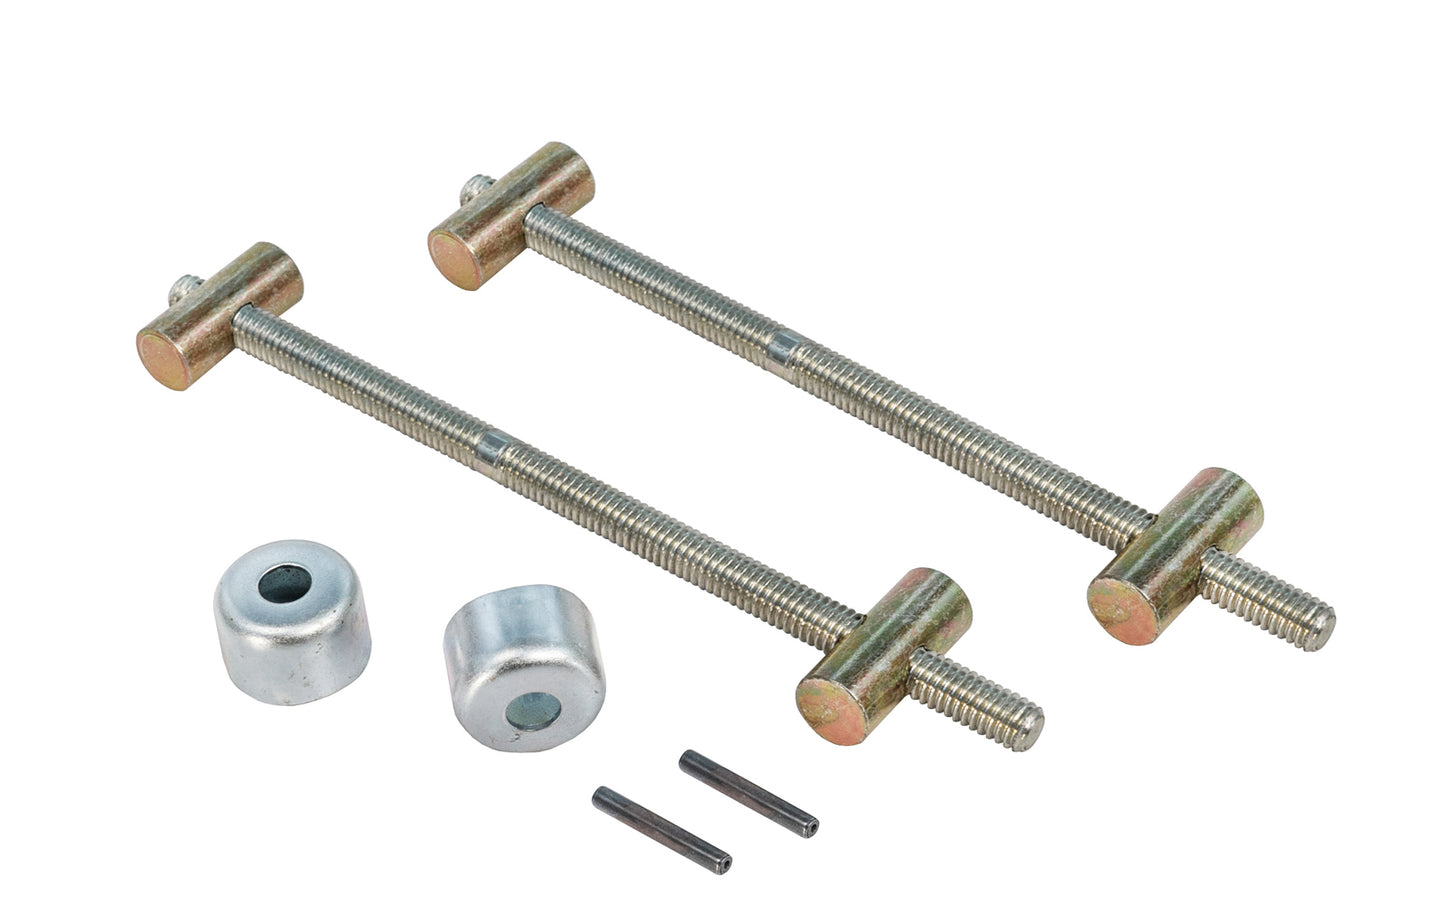 Build your own adjustable handscrew clamp with this kit. This kit is designed for 8" Jaw Length Handscrew Clamps. Spindles & swivel nuts are of cold drawn carbon steel & the threads have double leads for rapid operation & close tolerances. All metal parts are treated to prevent rust. Model 00080 ~ Made in USA. 099687000809